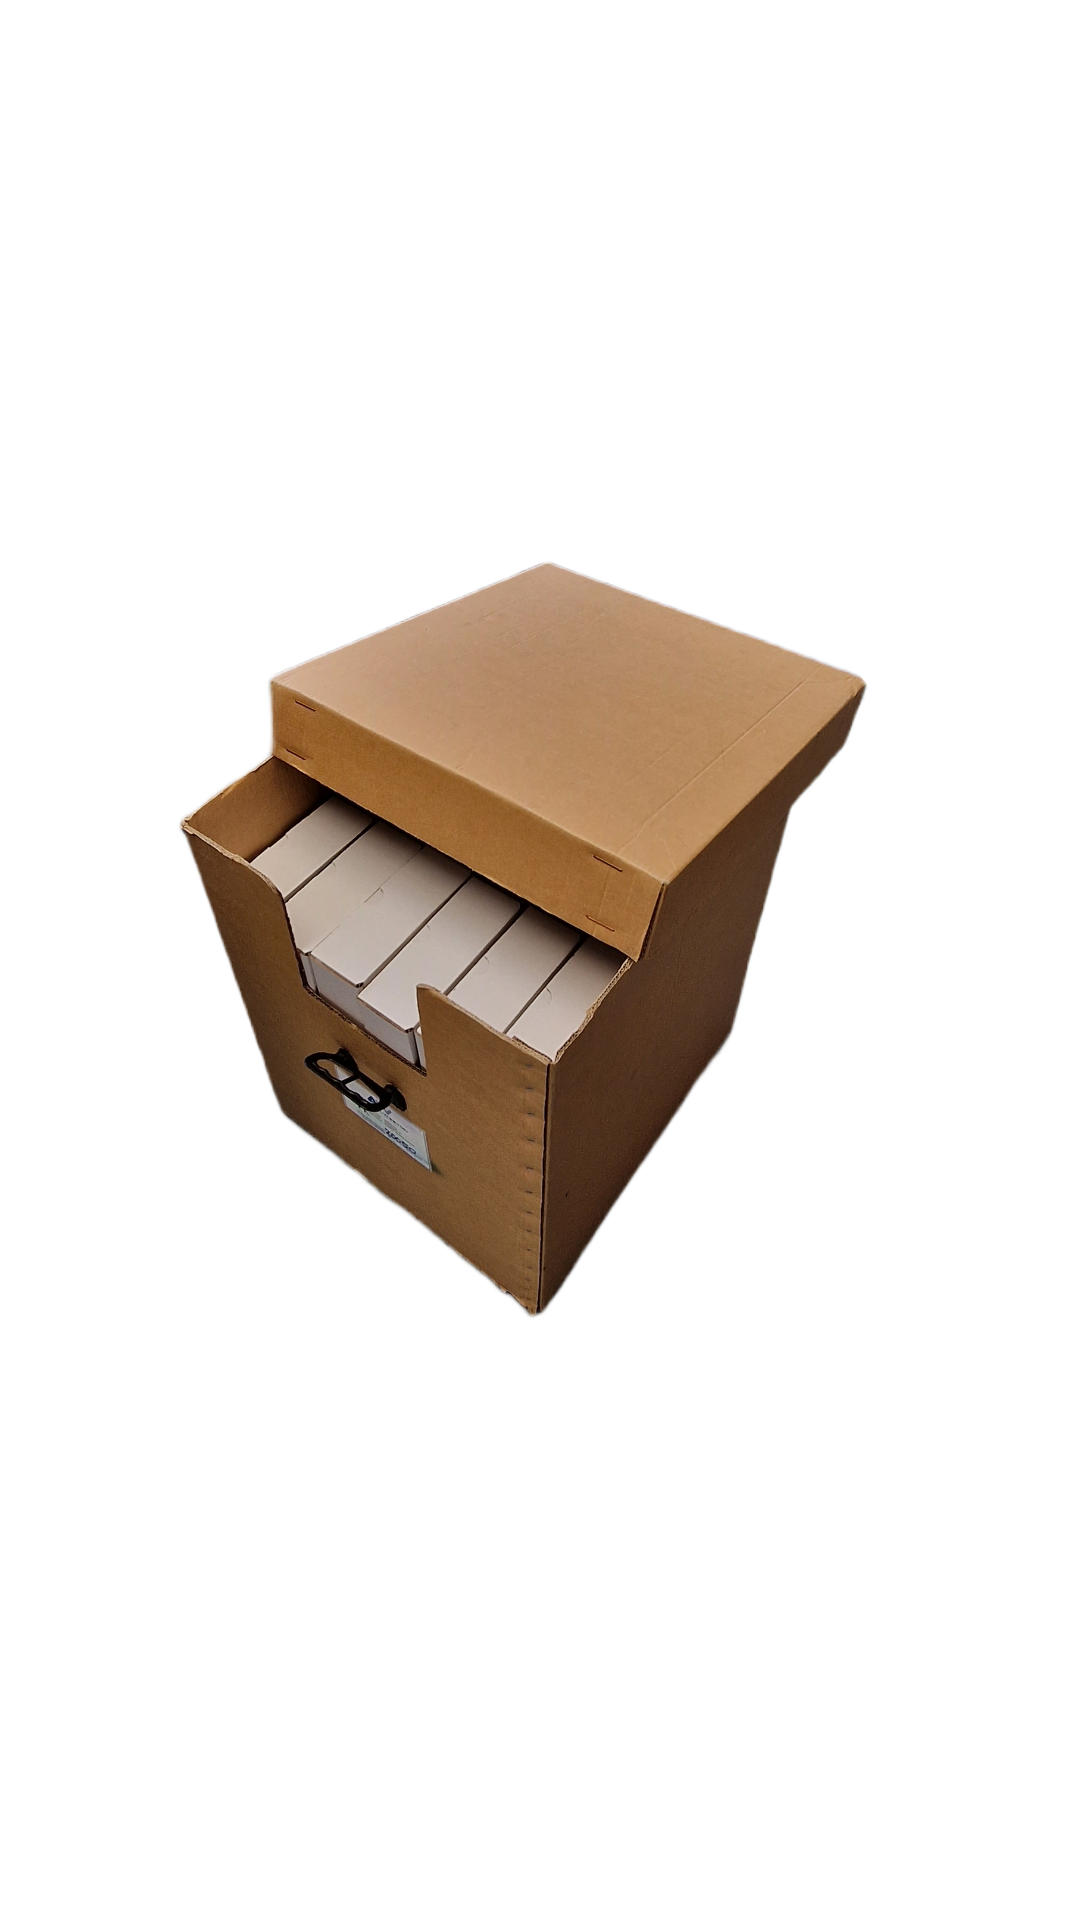 Reusable package with boxes inside.